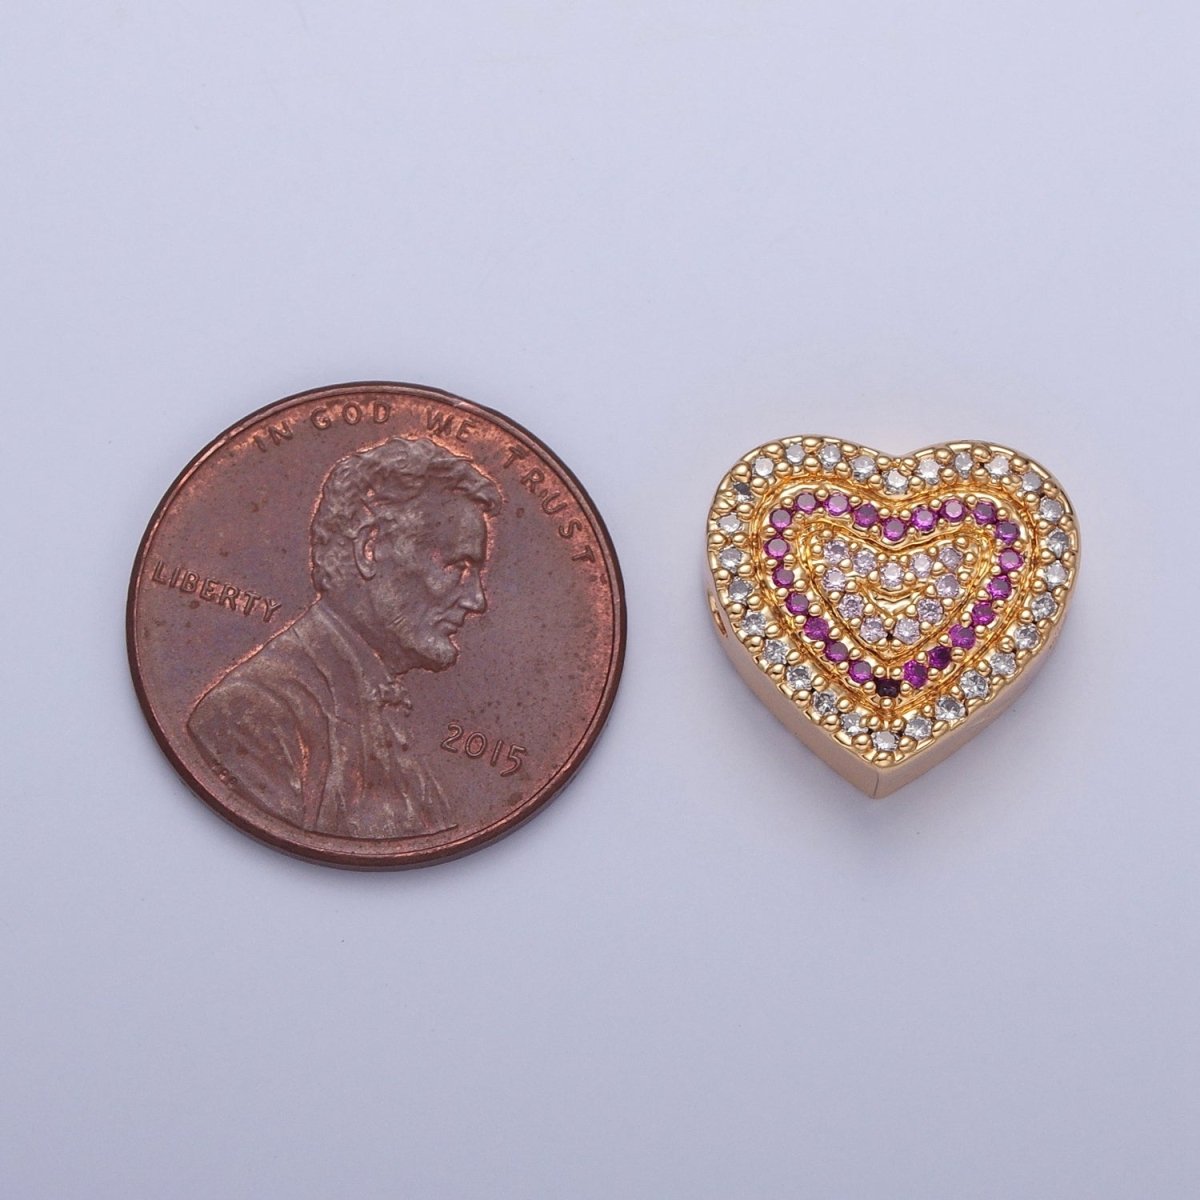 24K Gold Filled Micro Pave Cubic Zirconia Heart Spacer Bead, Multicolor Cubic Zirconia CZ Valentine Love Jewelry Making Component W-898 W-899 W-900 W-901 - DLUXCA